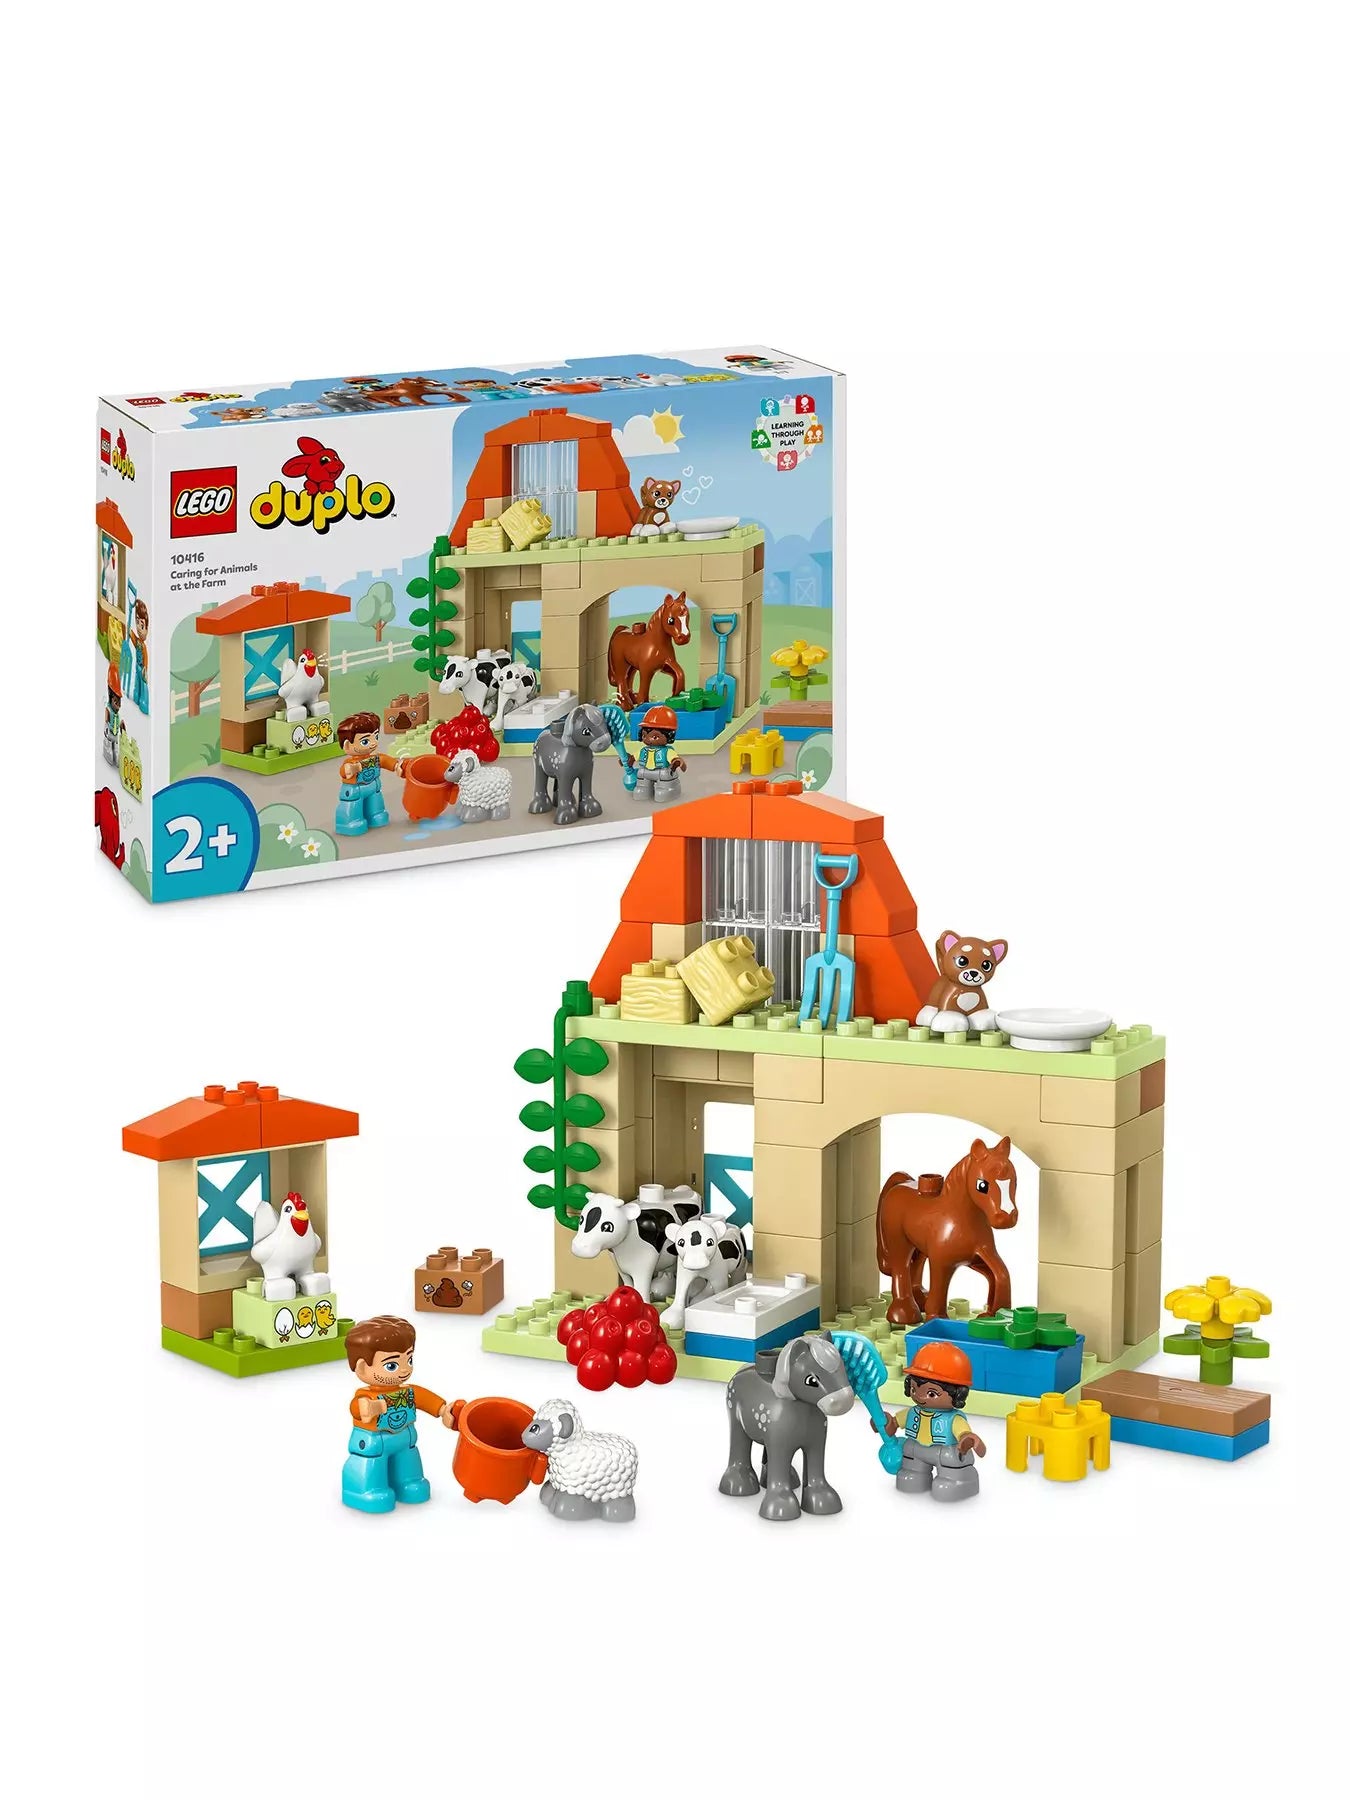 Lego Duplo 10416 Caring For Animals At the Farm